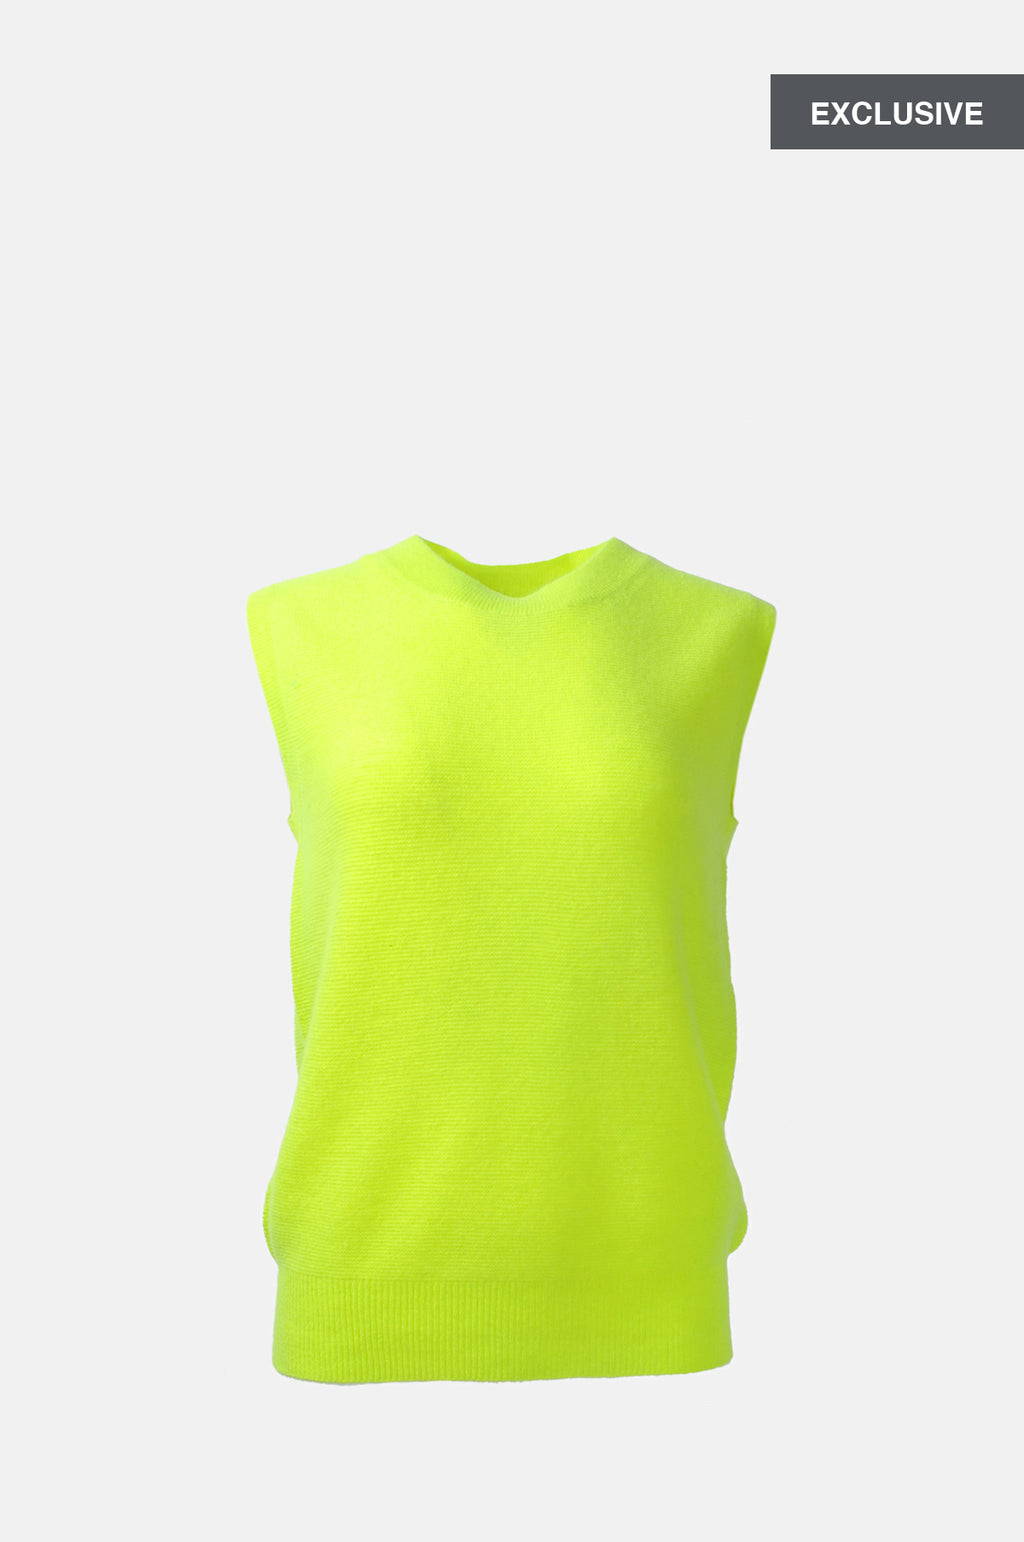 The Jumper 1234 Moss Tank in Neon Yellow.